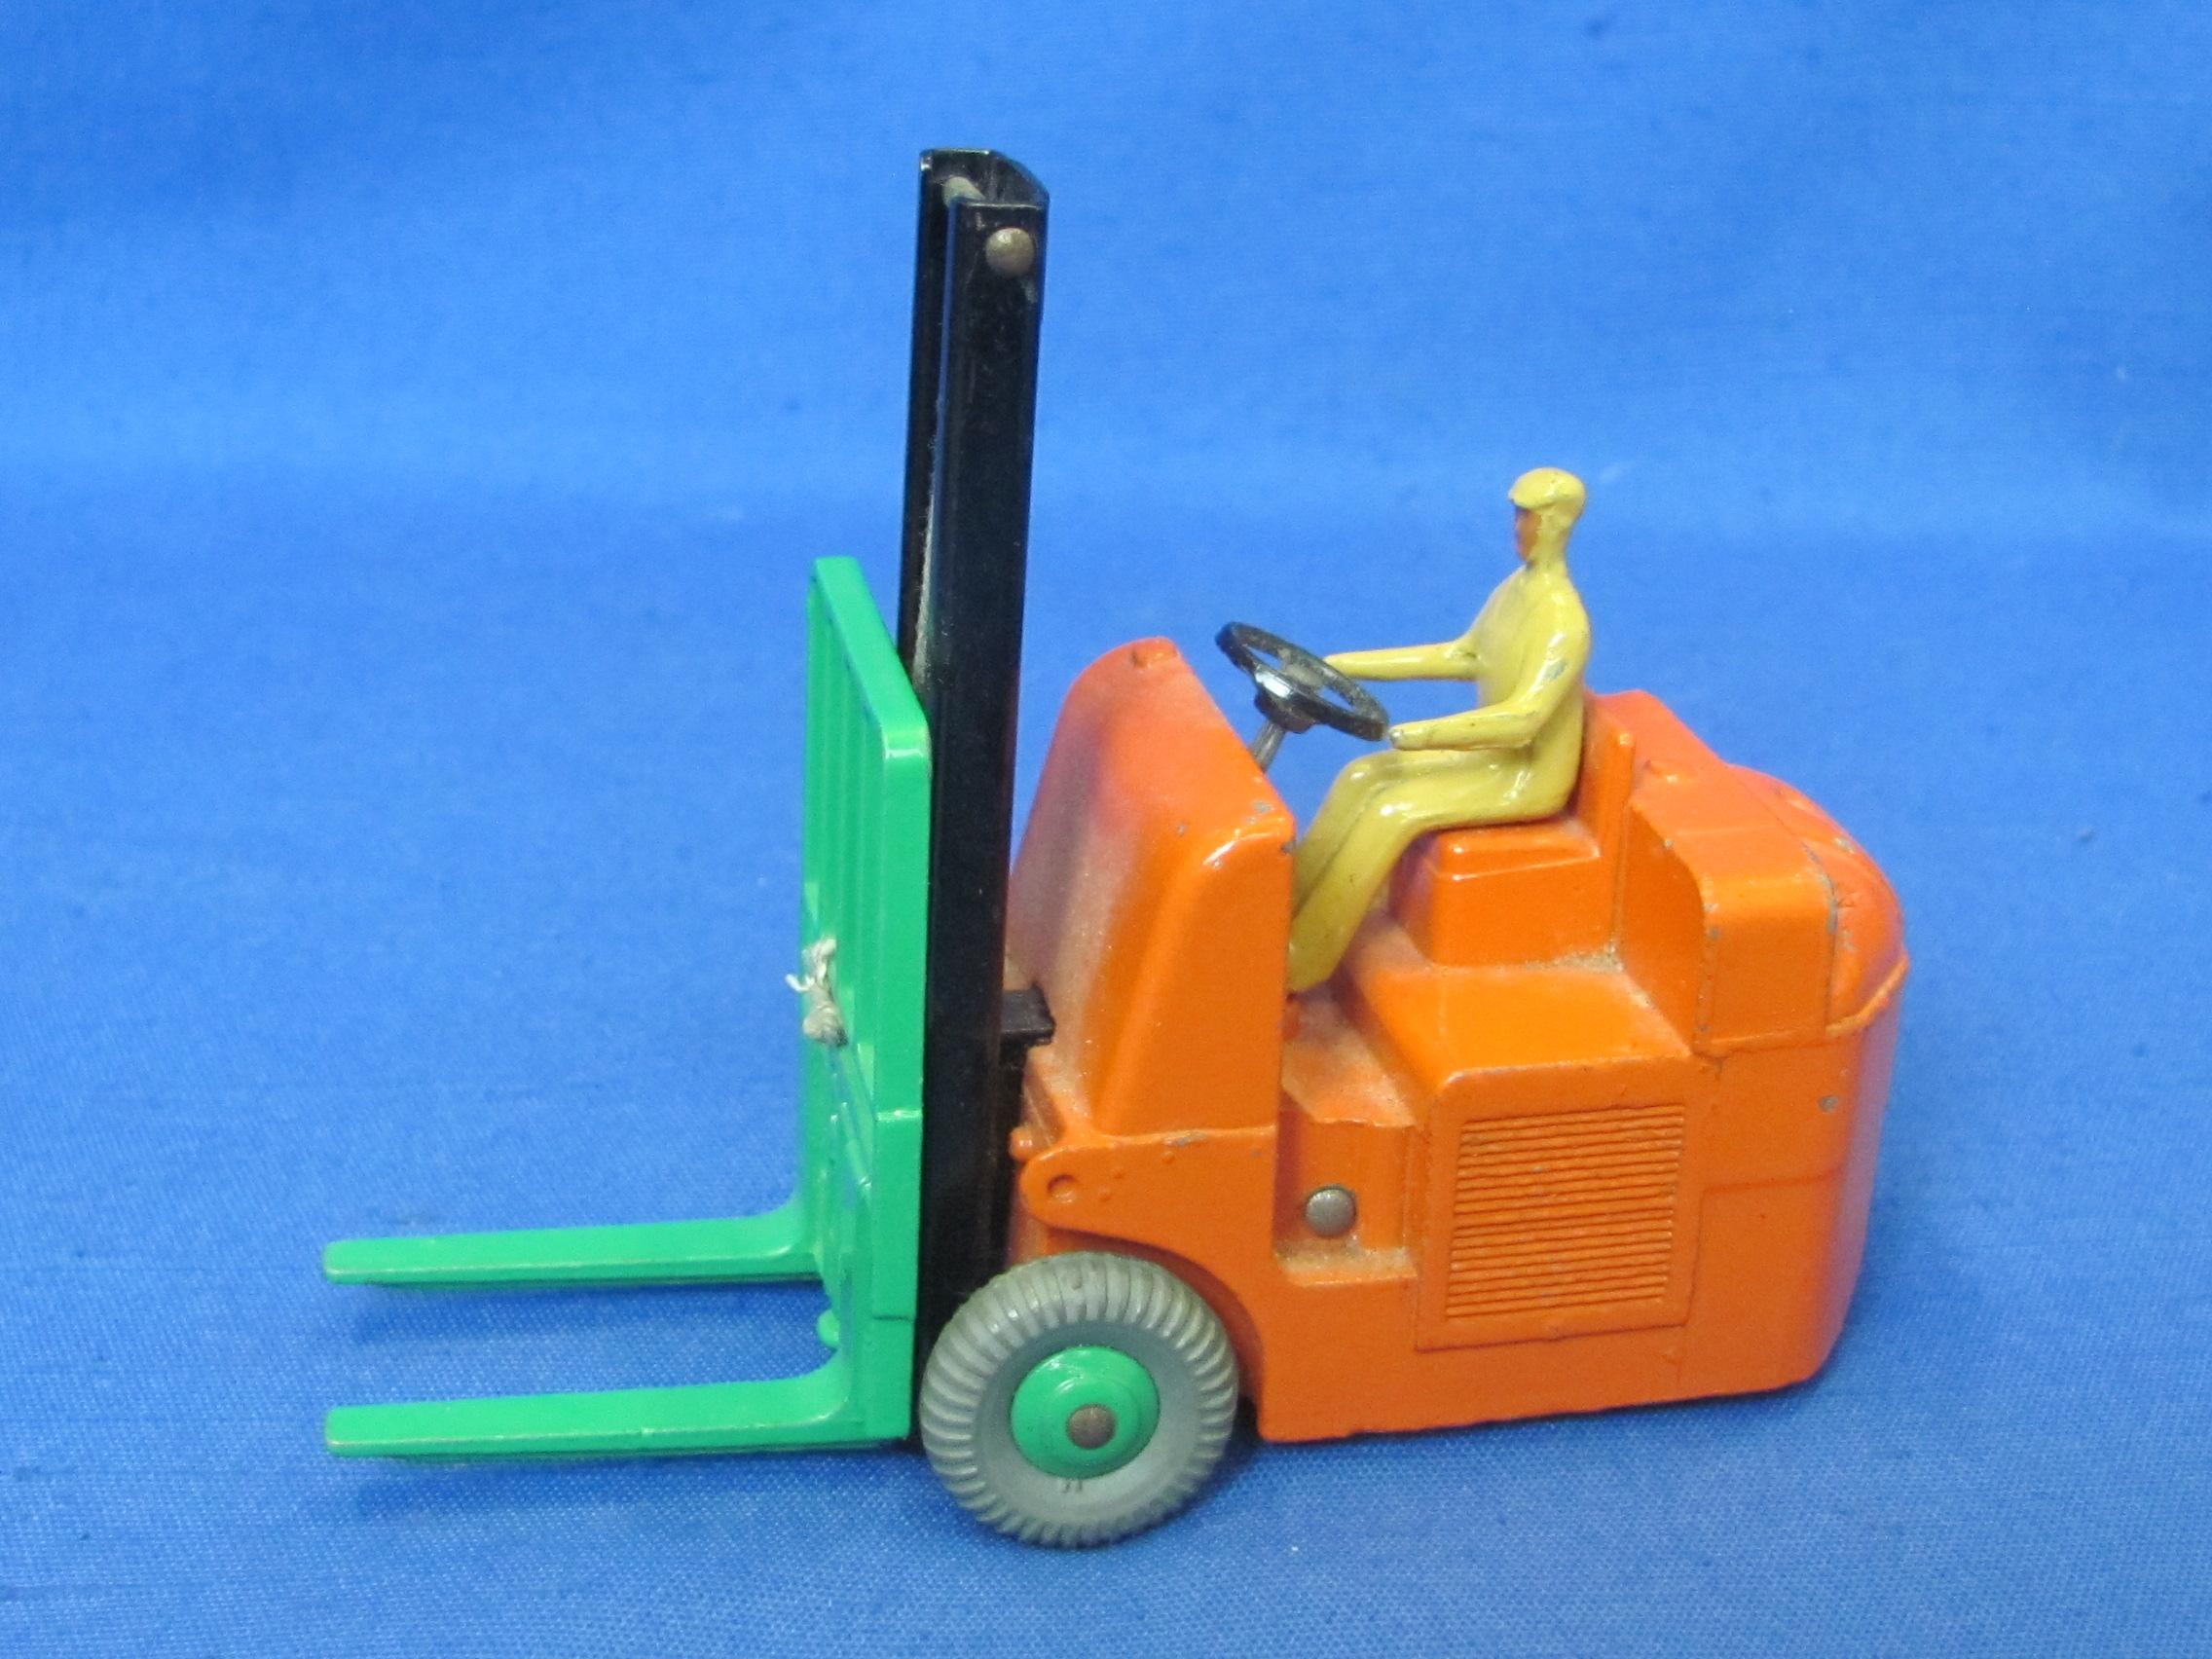 Dinky Toys “Coventry Climax Fork Lift Truck” by Meccano – Made in England – 4 1/4” long